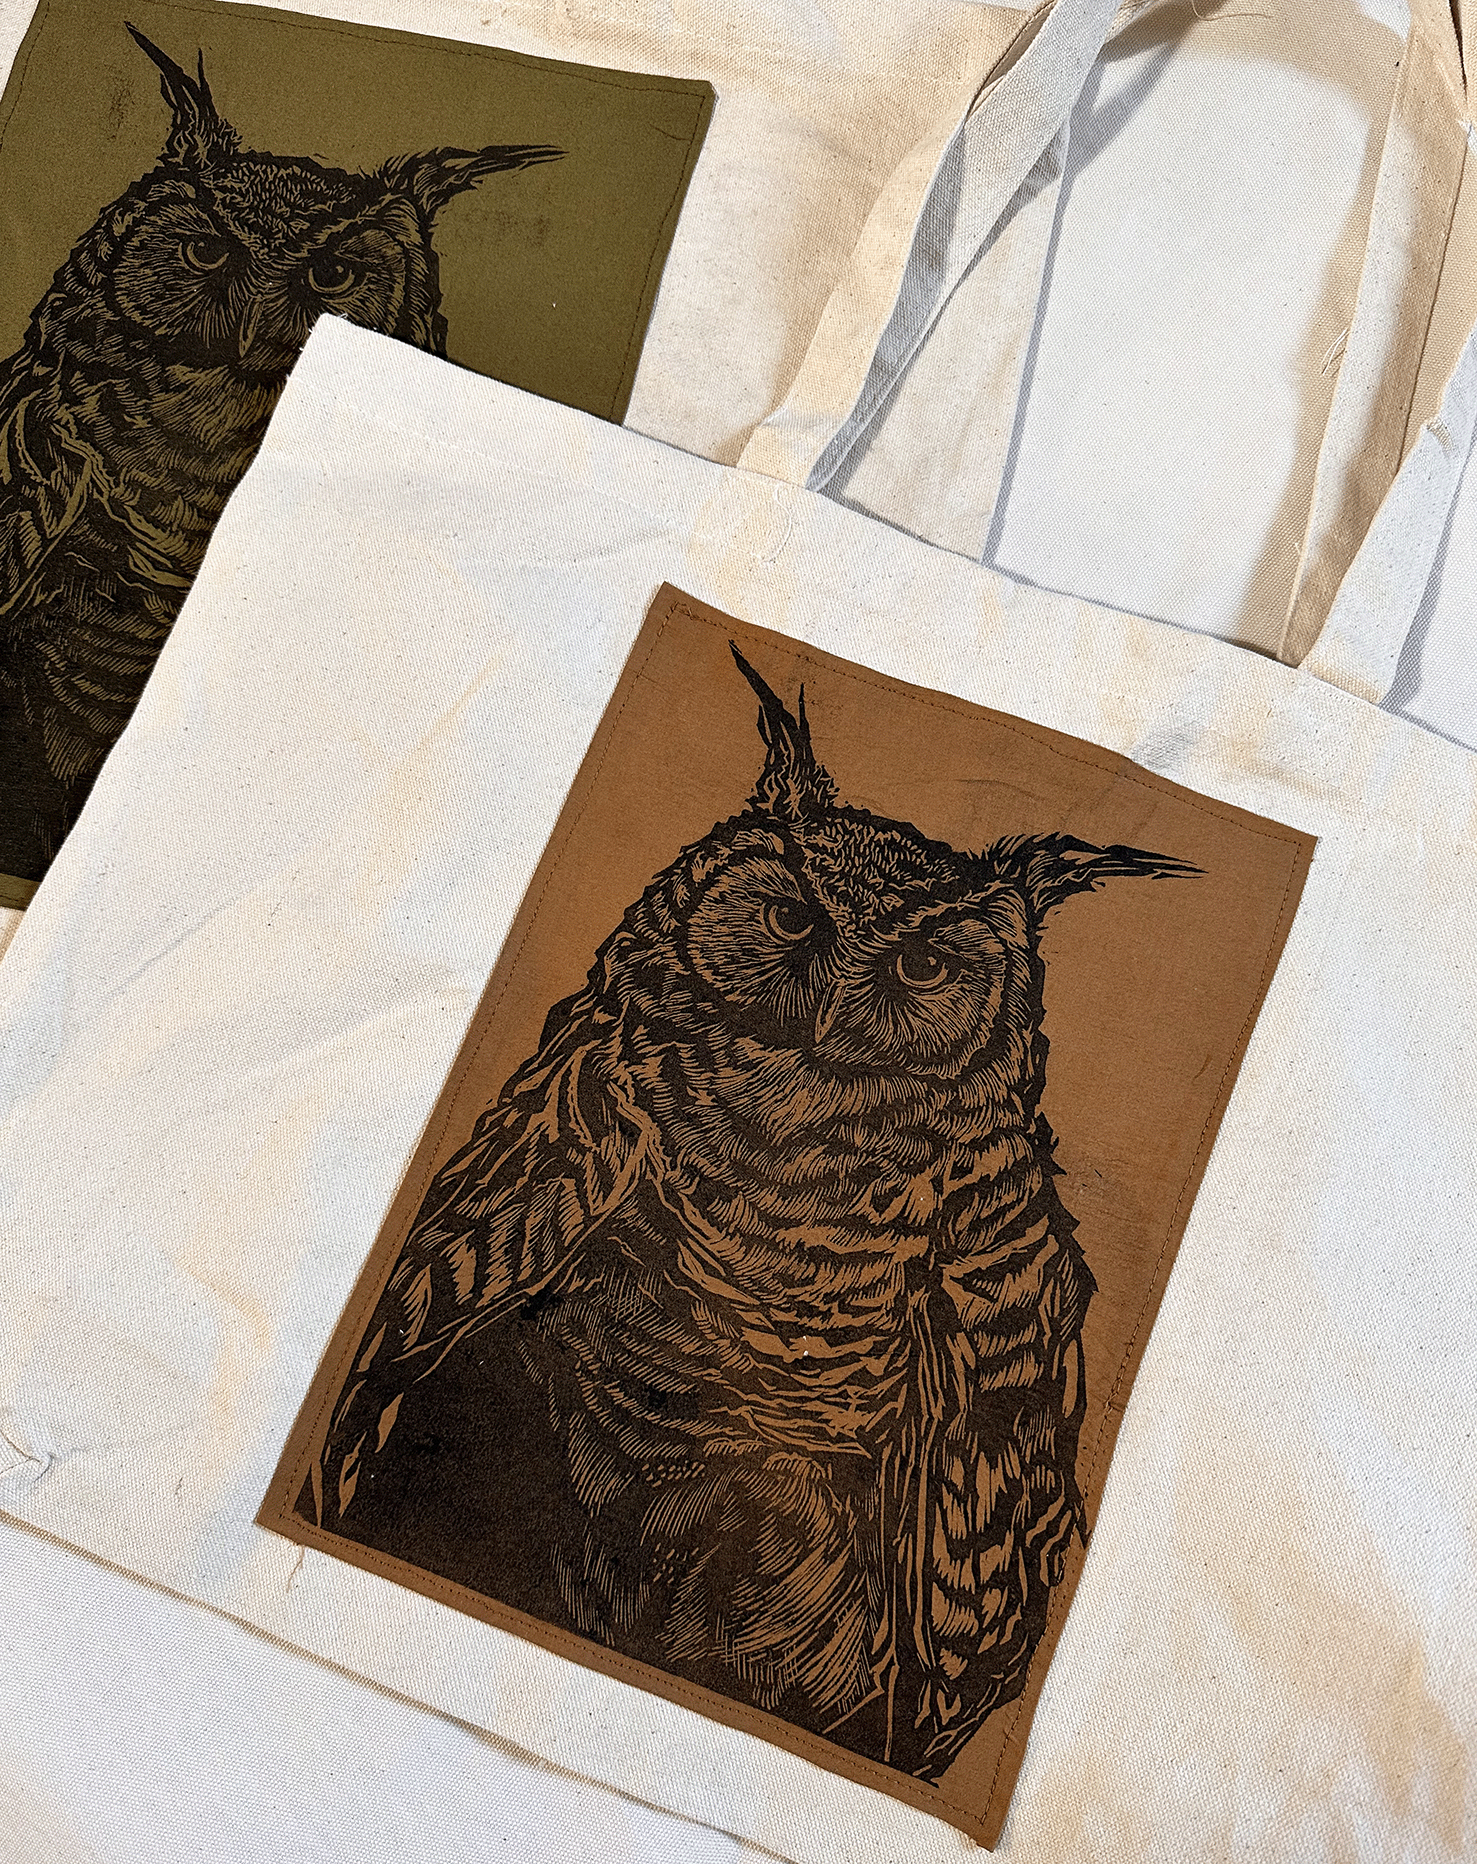 Image of Owl Tote Bags – Hand-printed